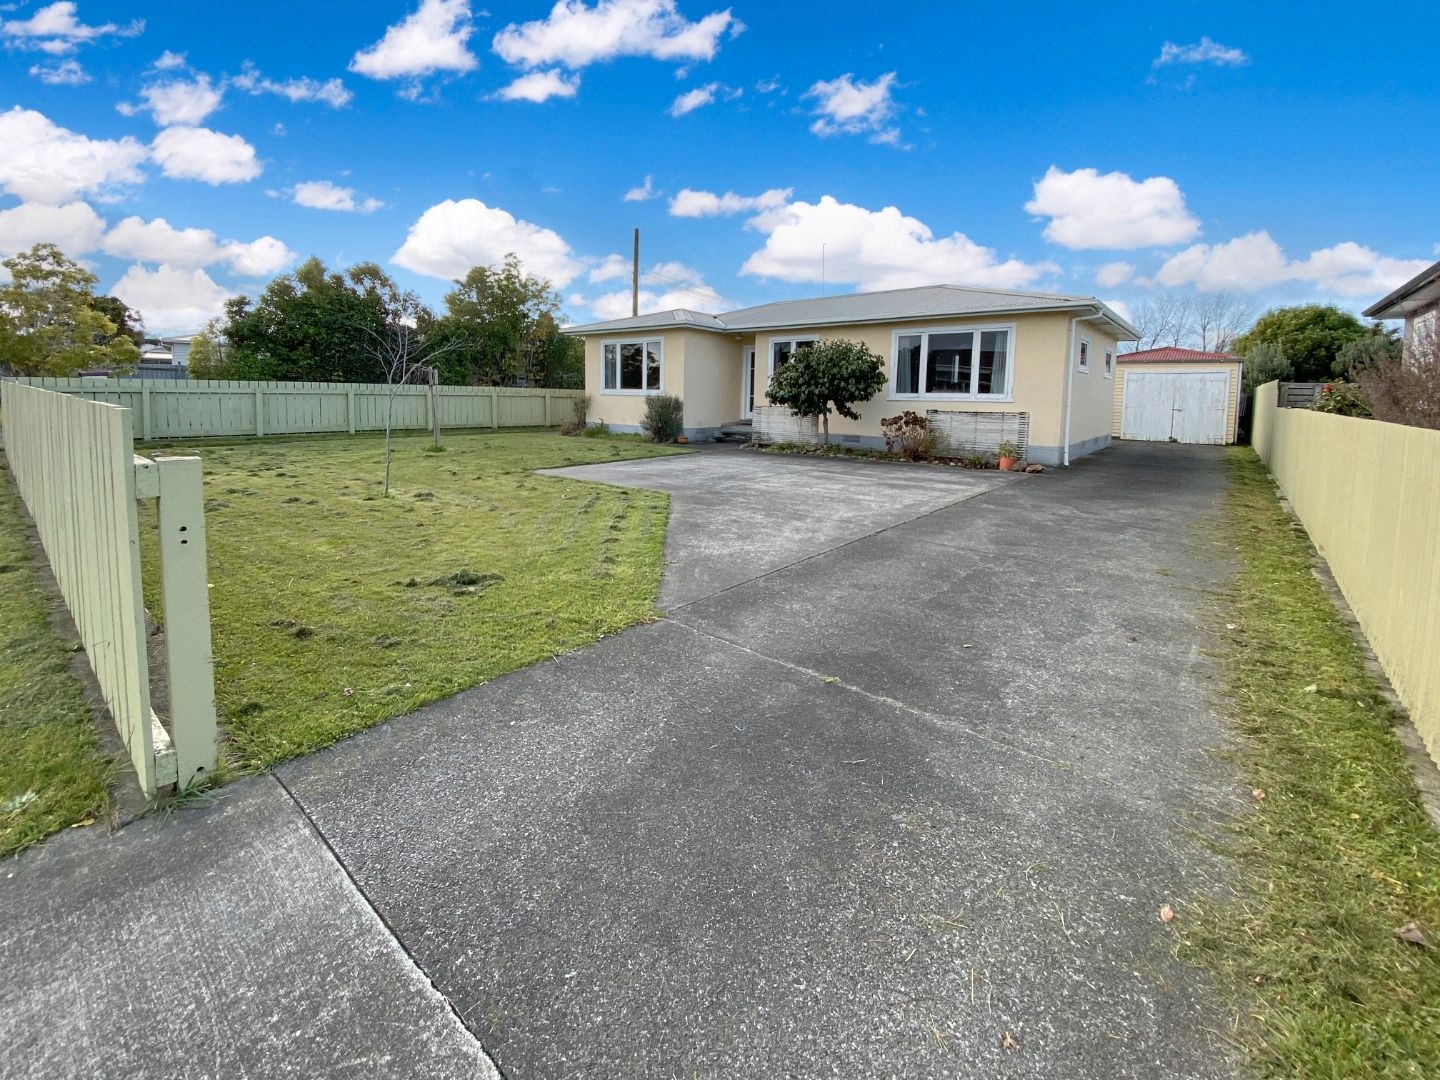 Real Estate For Rent Houses & Apartments : FEILDING - 3 BEDROOMS